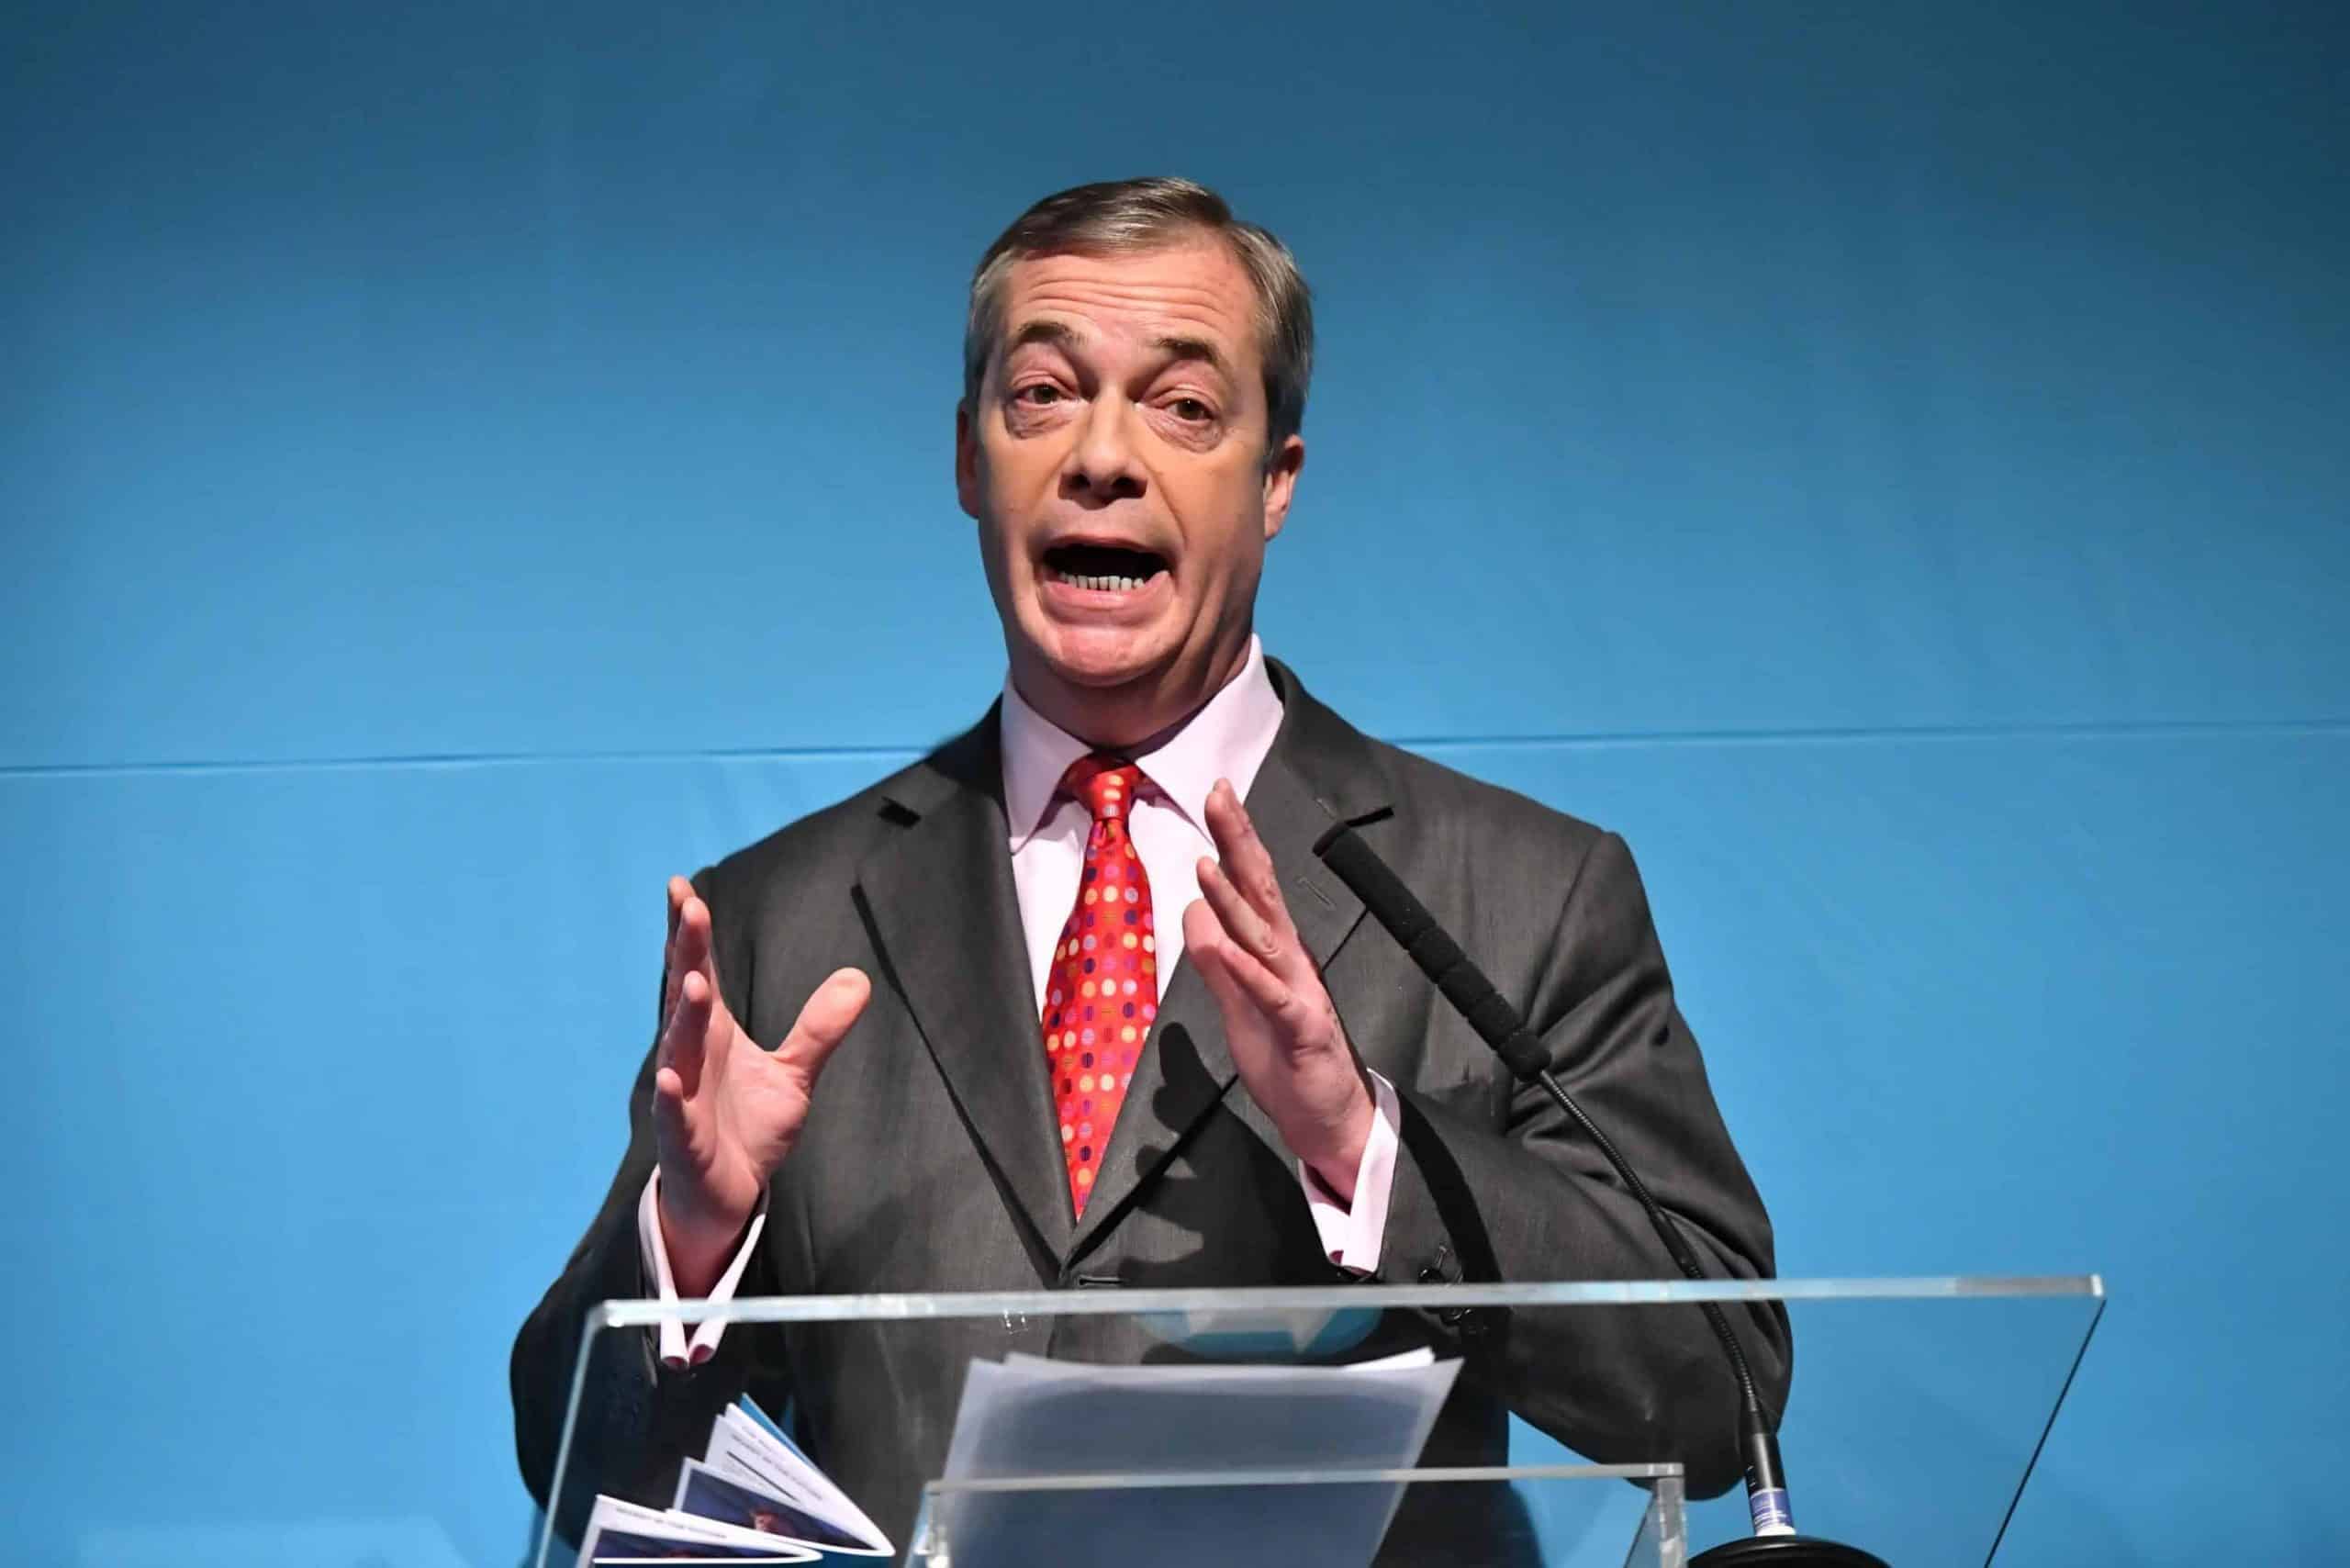 Farage reminded of Brexit free trade tweets as he takes aim at China